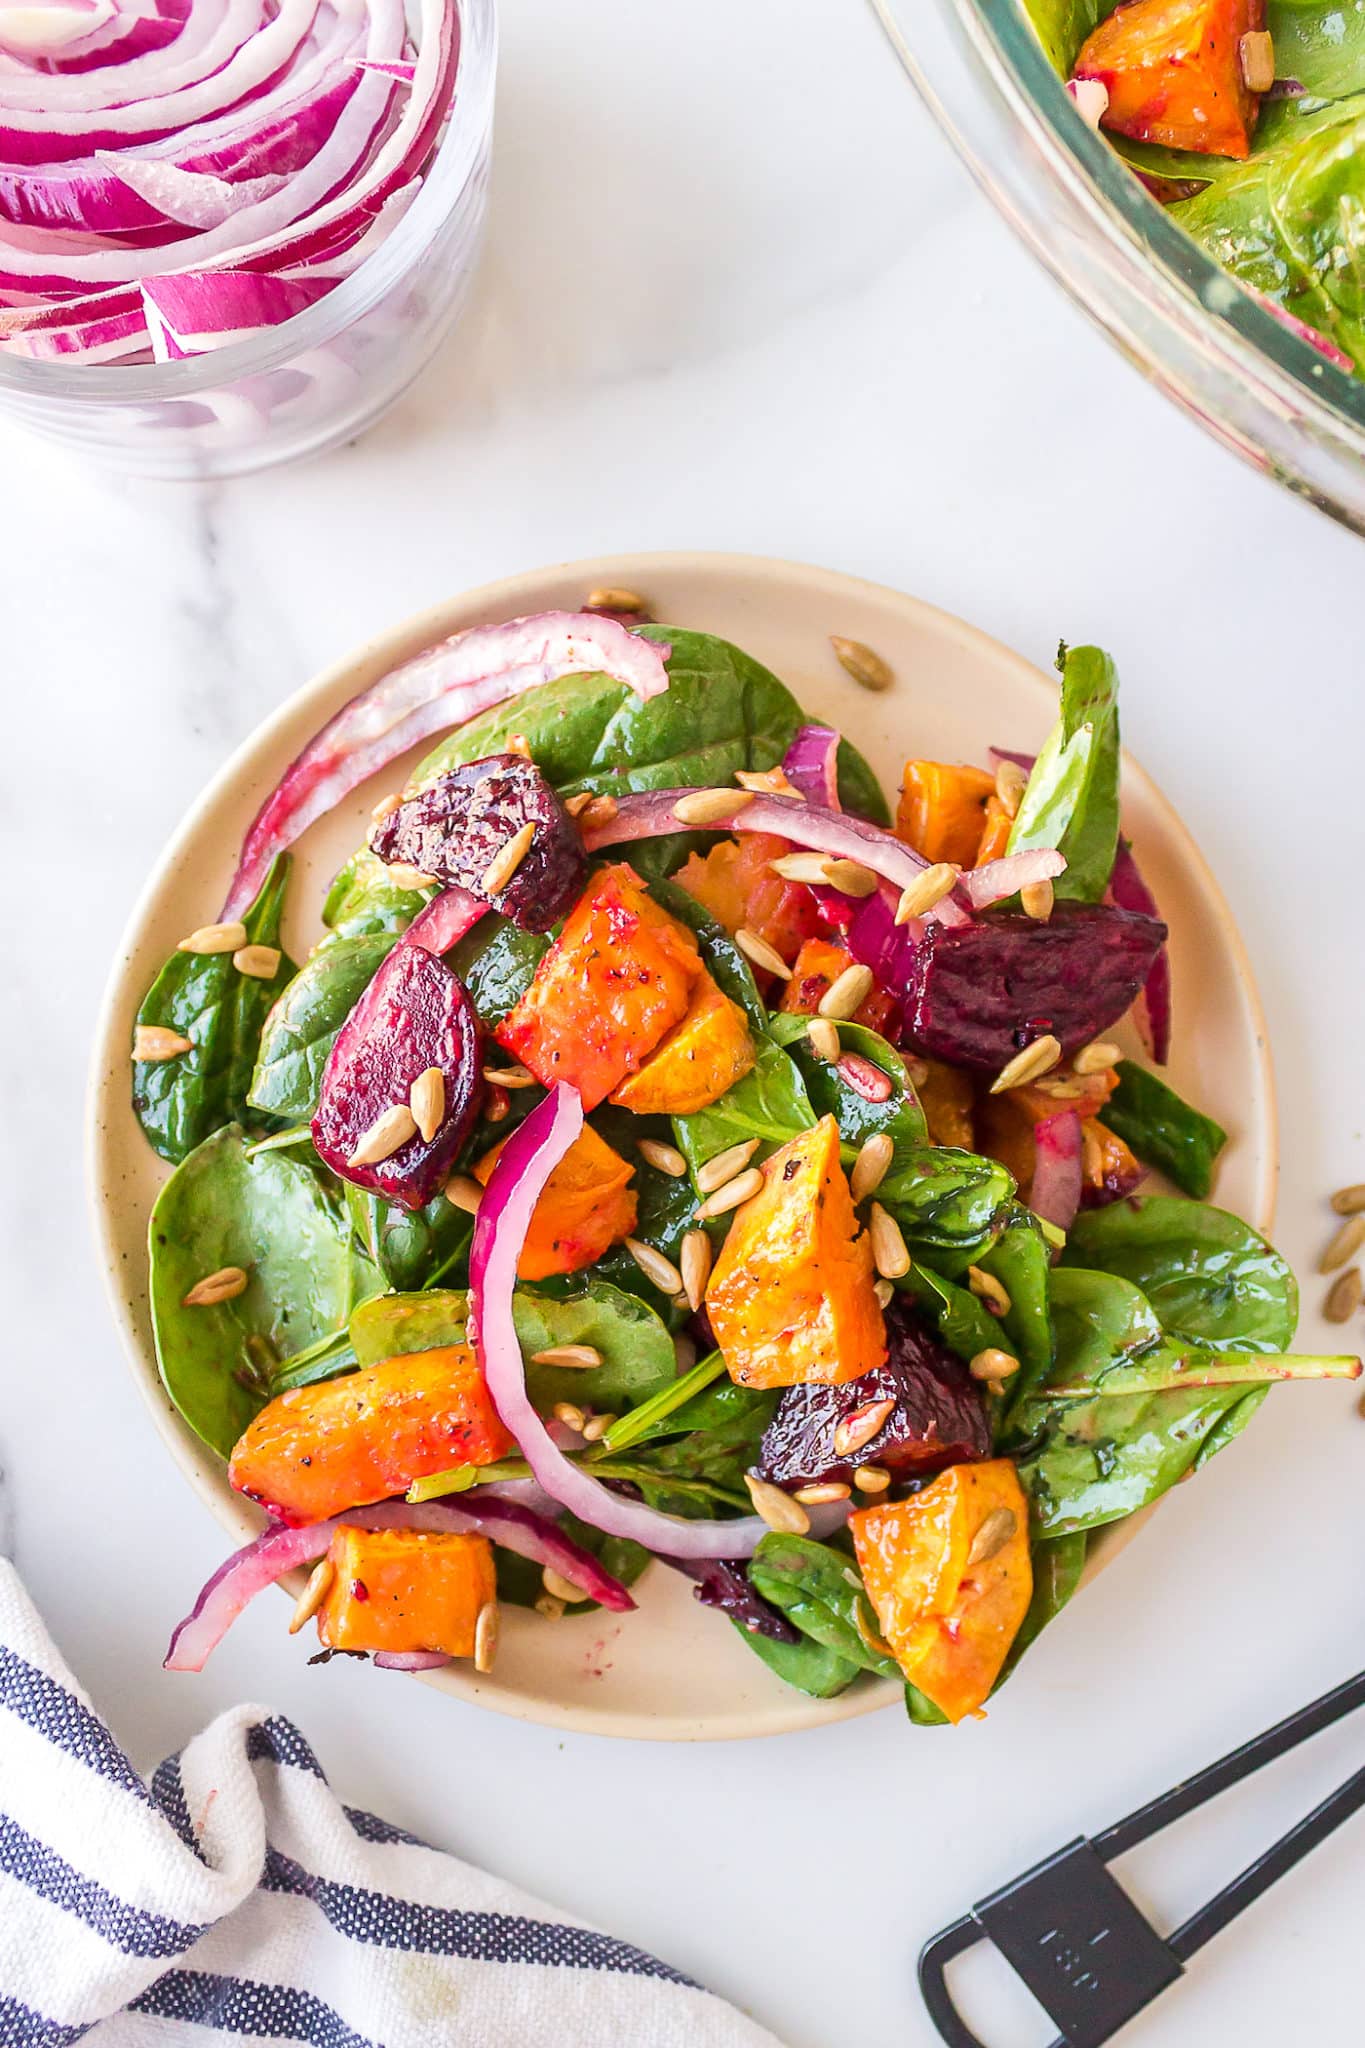 Diced beets and sweet potatoes on a dressed spinach salad on a dinner plate.